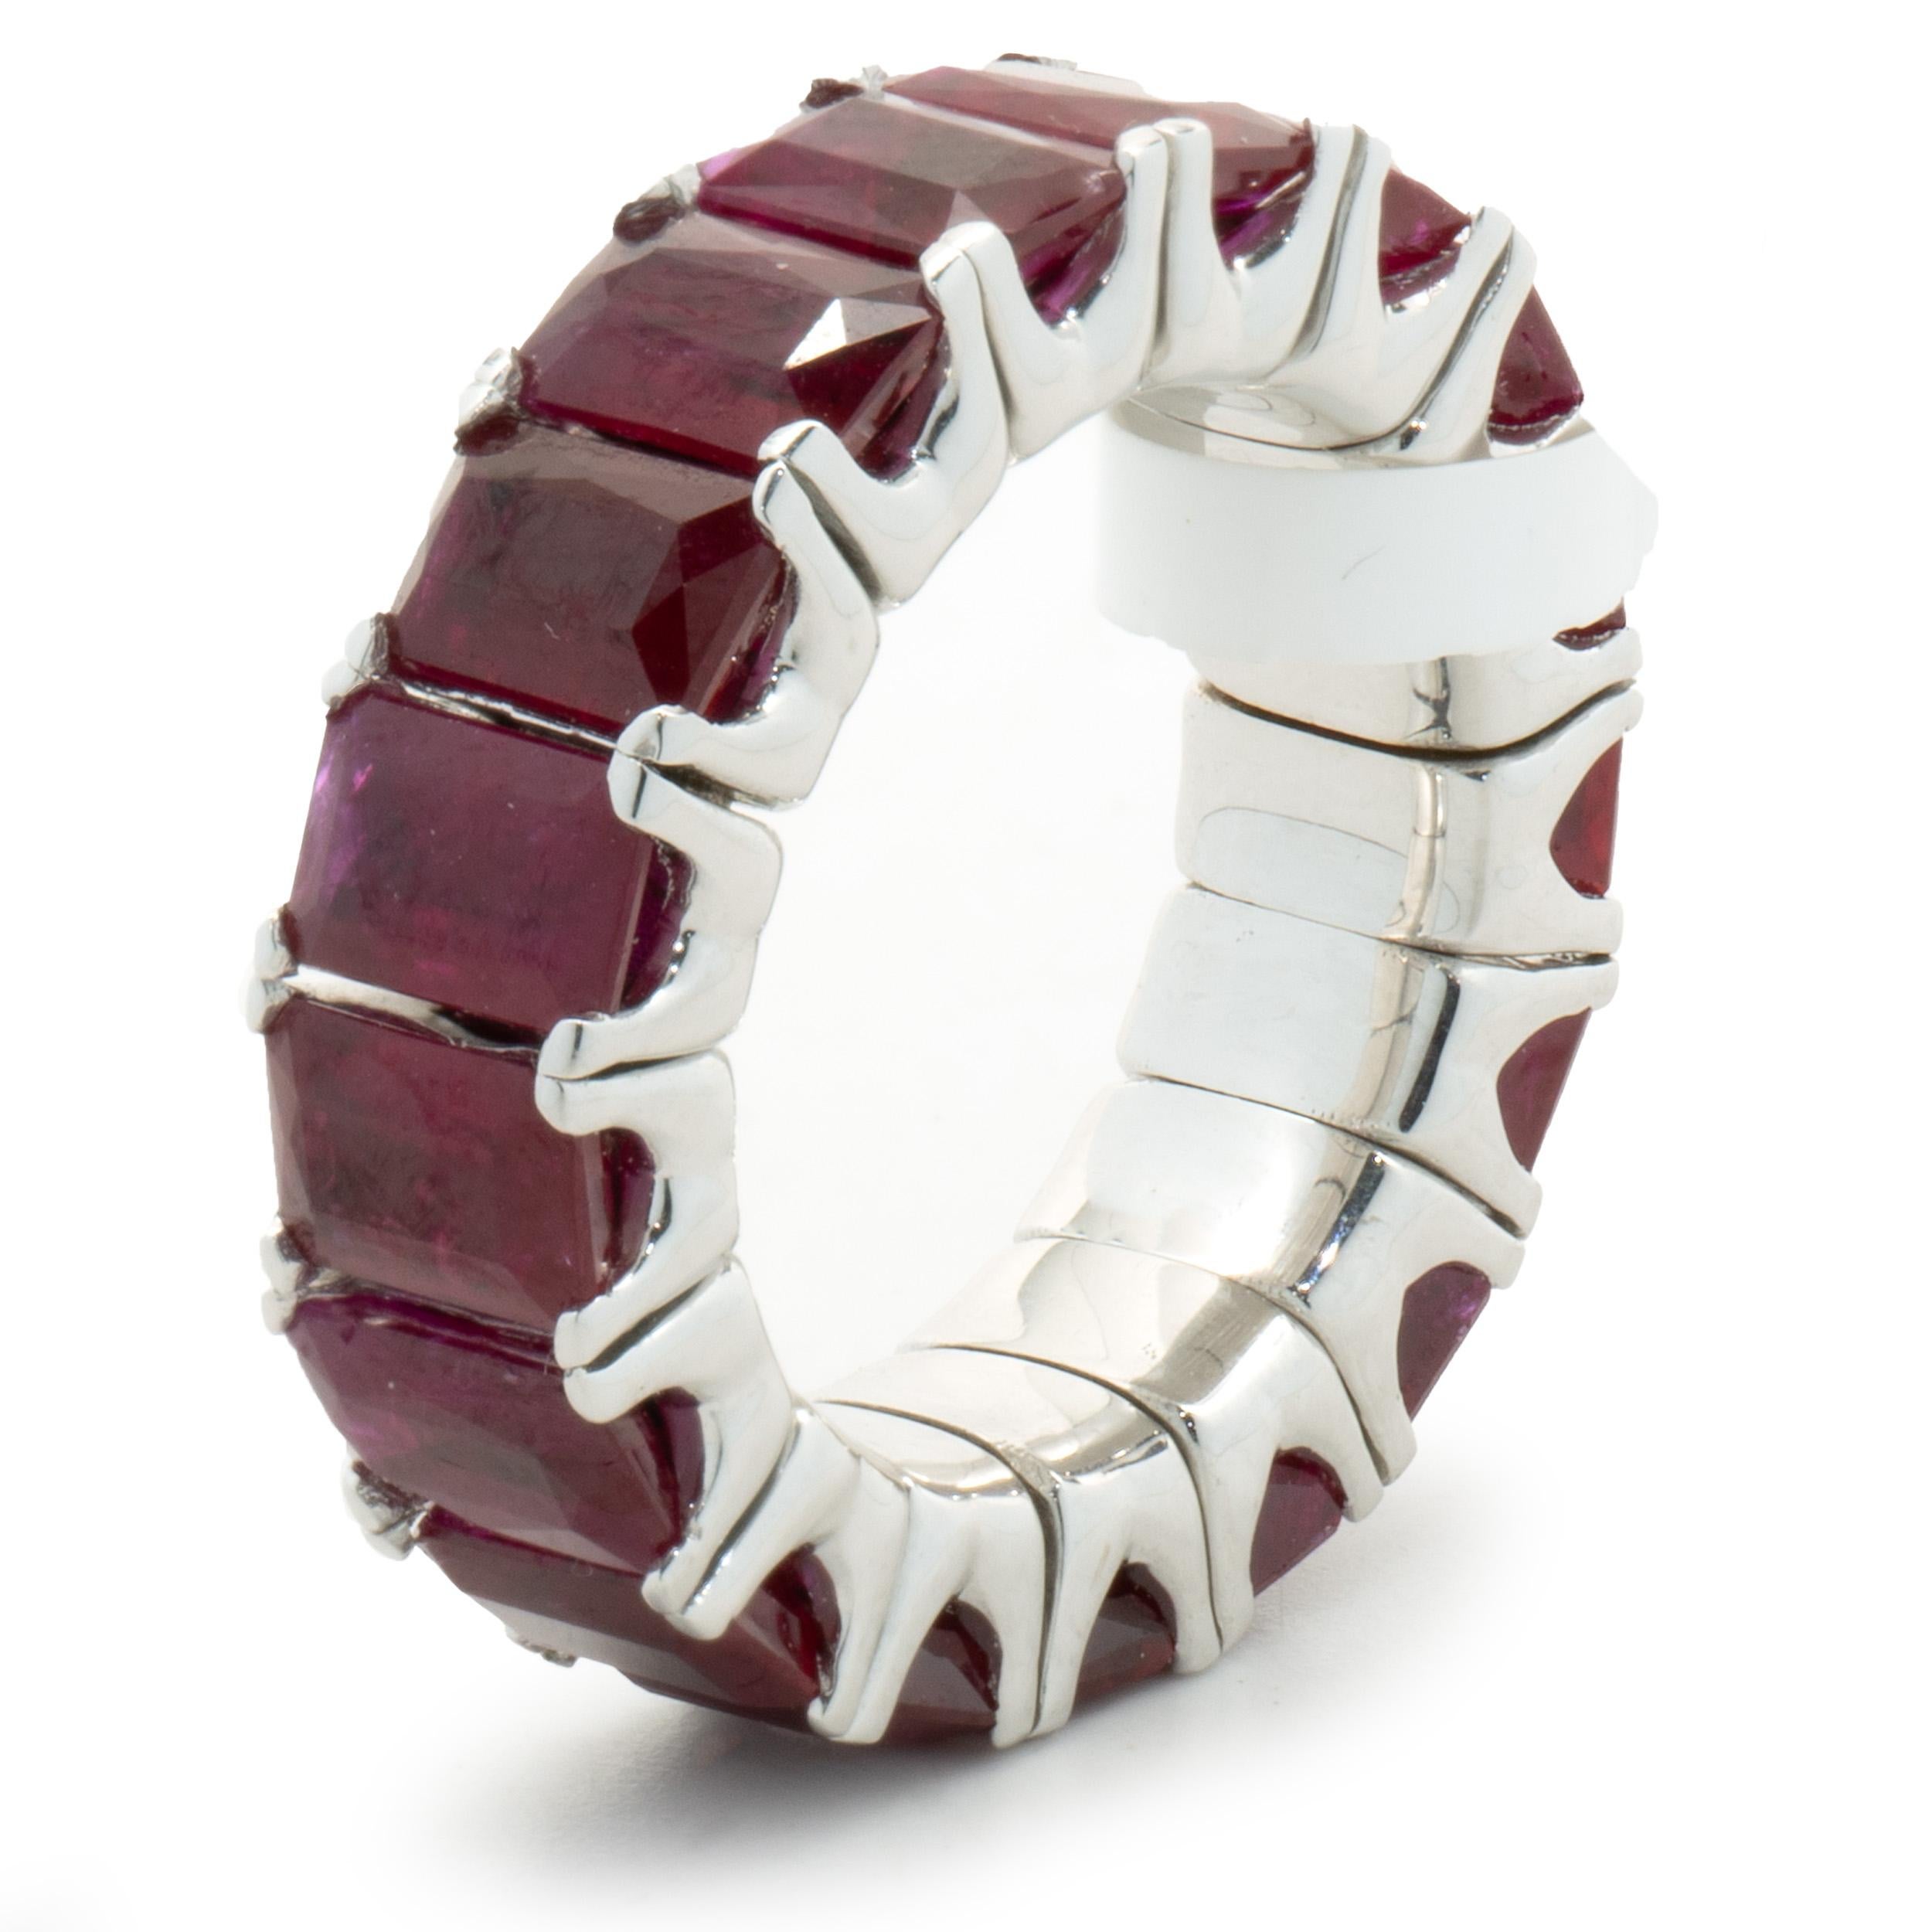 Designer: custom
Material: 18K white gold
Ruby: emerald cut = 12.22cttw
Dimension: ring top measures 6.75mm wide
Ring Size: 6-8 
Weight: 10.99 grams